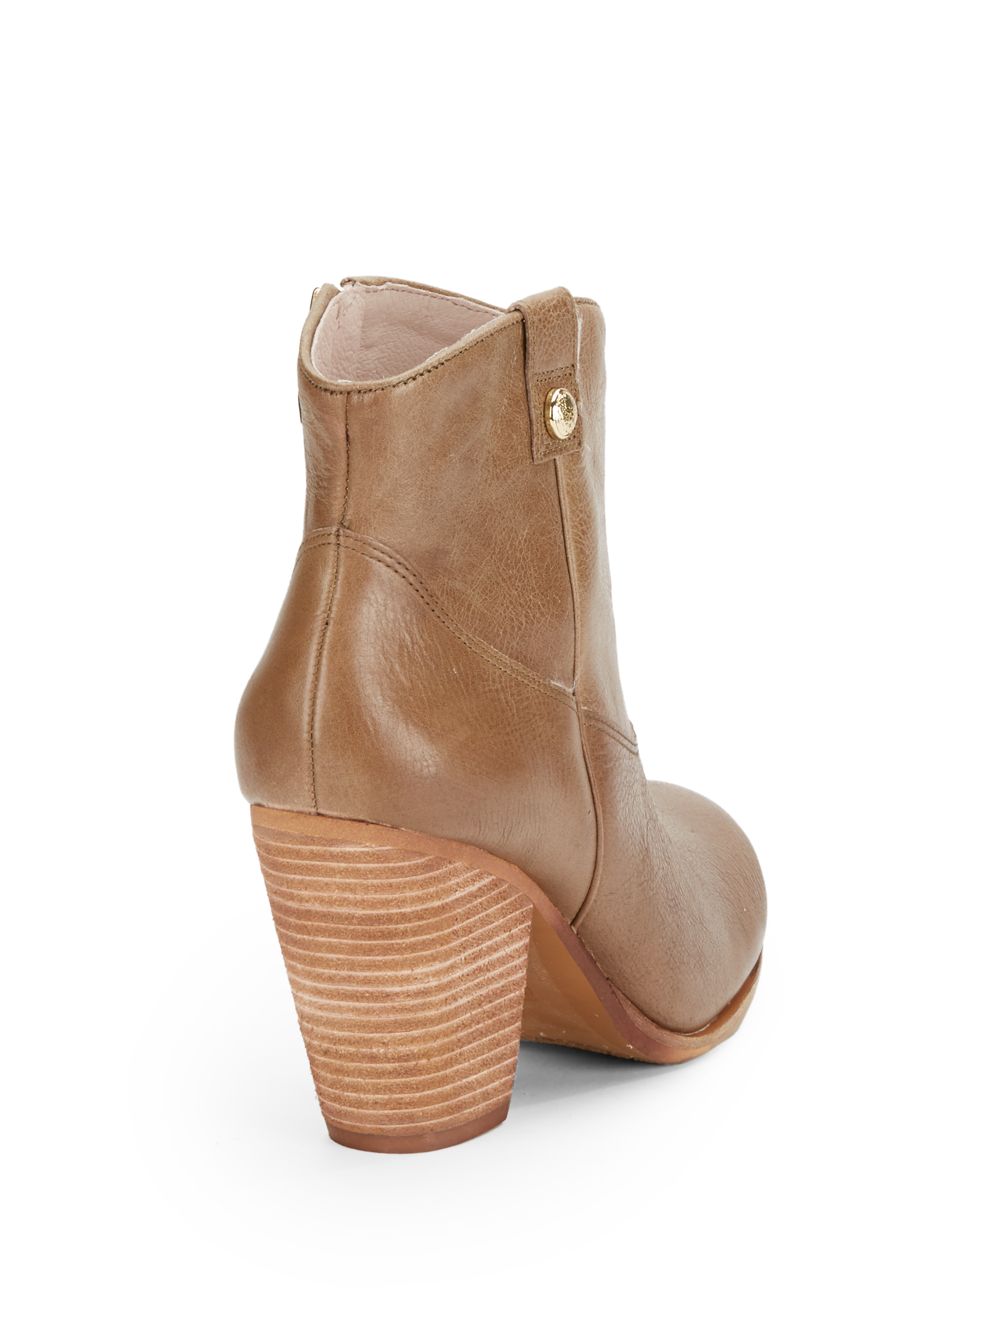 Lyst - Vince camuto Hammerton Leather Ankle Boots in Brown